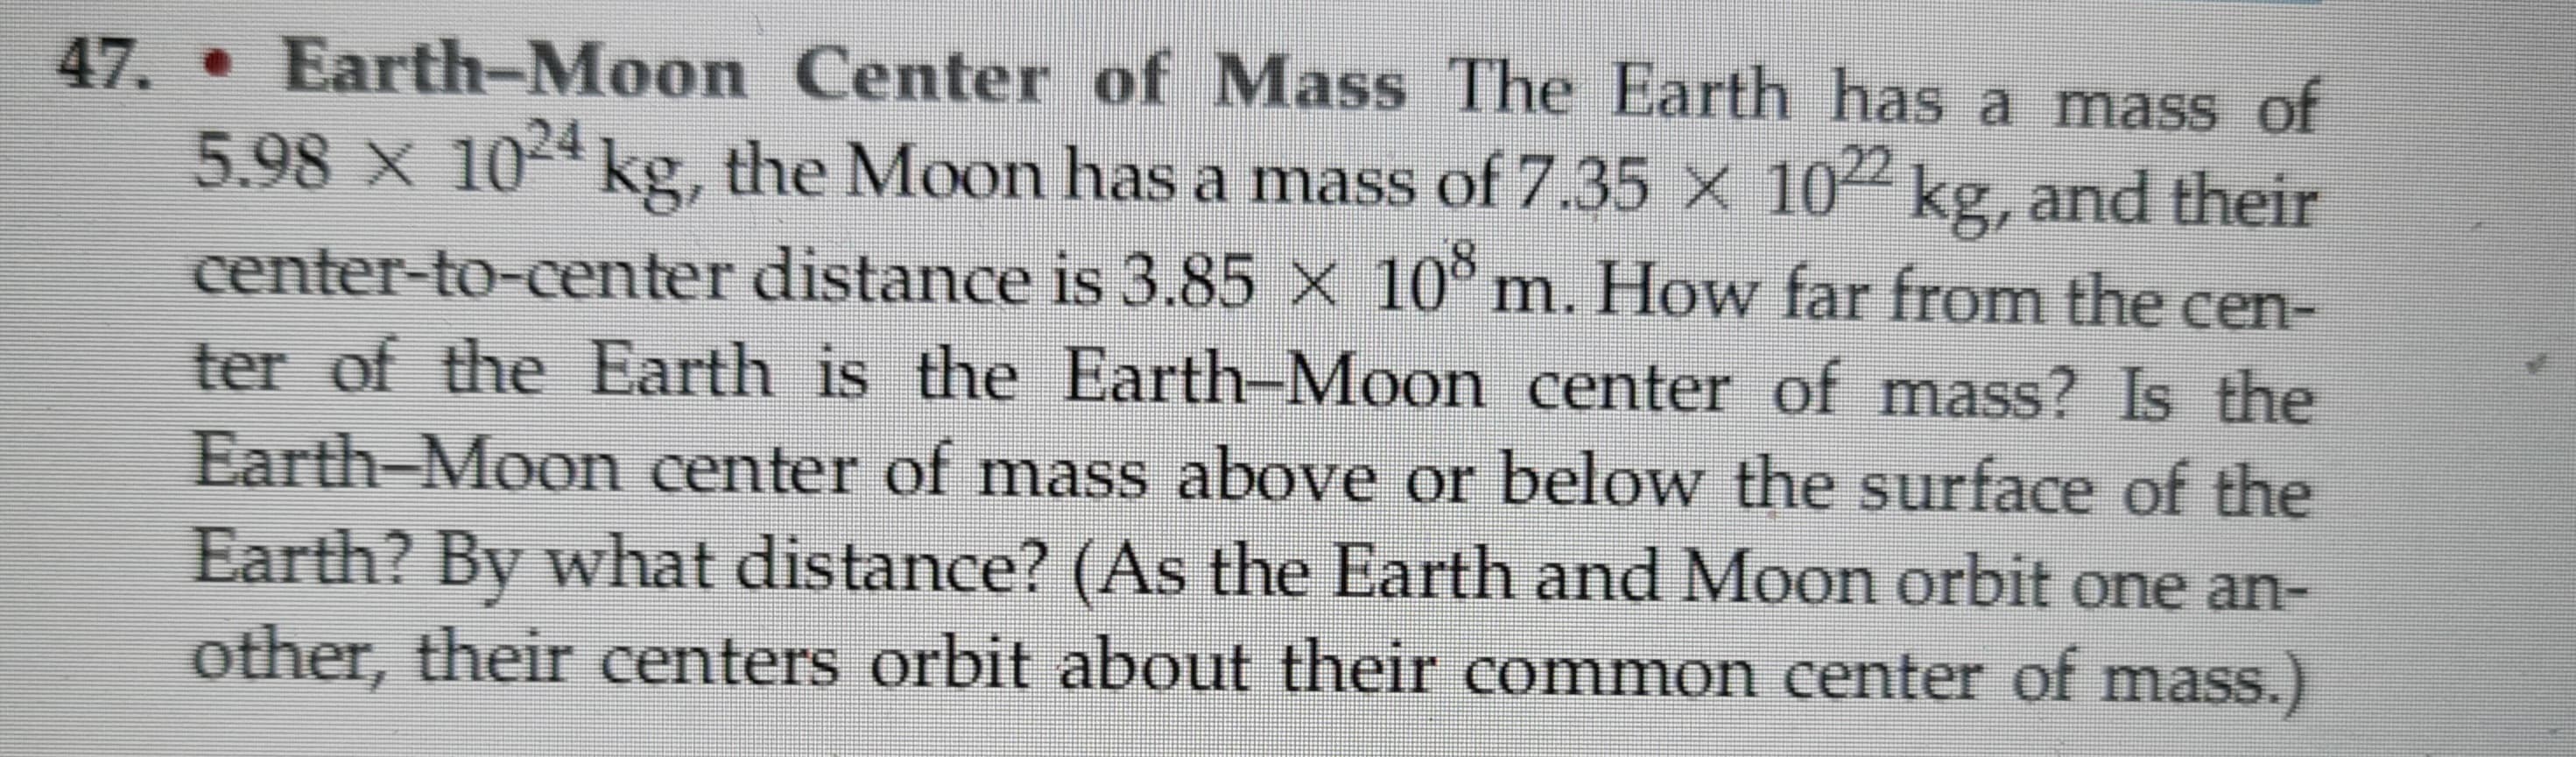 47. • Earth-Moon Center of Mass The Earth has a mass of
5.98 x 1024 kg, the Moon has a mass of 7.35 × 1022 kg, and their
center-to-center distance is 3.85 × 108 m. How far from the cen-
ter of the Earth is the Earth-Moon center of mass? Is the
Earth-Moon center of mass above or below the surface of the
Earth? By what distance? (As the Earth and Moon orbit one an-
other, their centers orbit about their common center of mass.)